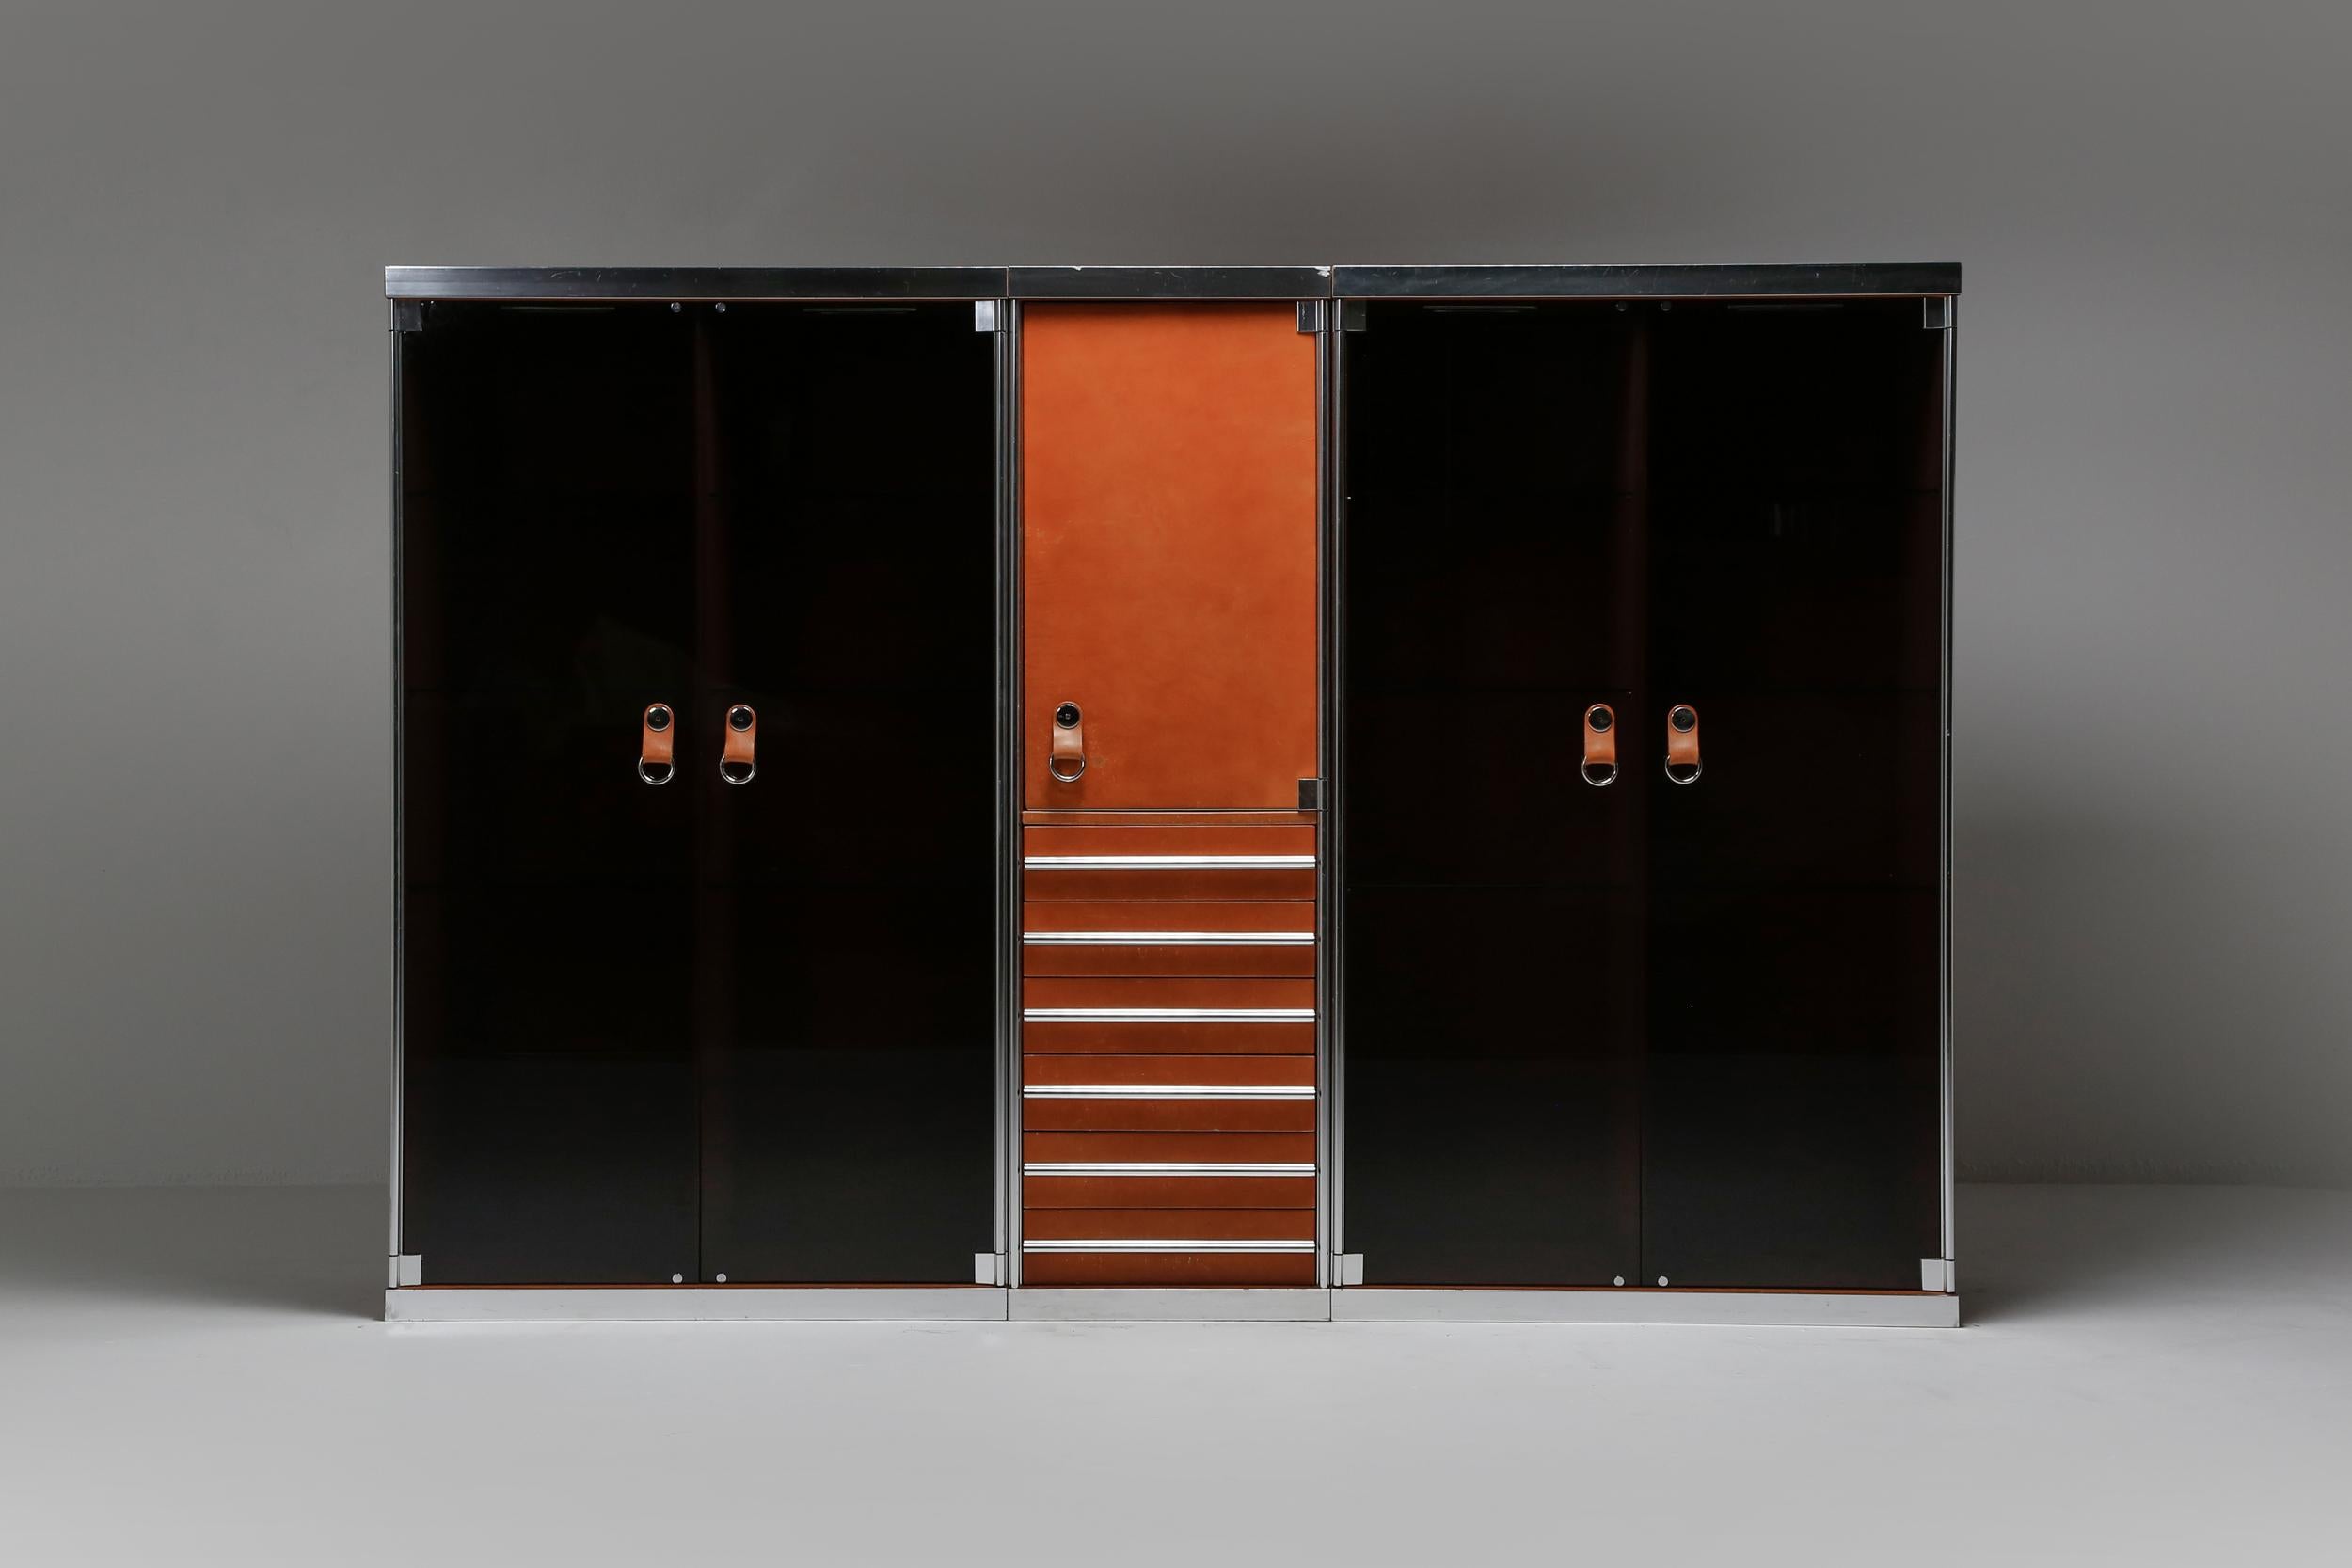 Guido Faleschini showcase, dresser, designed for the Hermès shop in Paris, Mariani Italy 1970s

consisting of one Hermès cognac leather drawer chest with shelves, flanked by two showcases with glass shelving and lights, finished with chromed steel